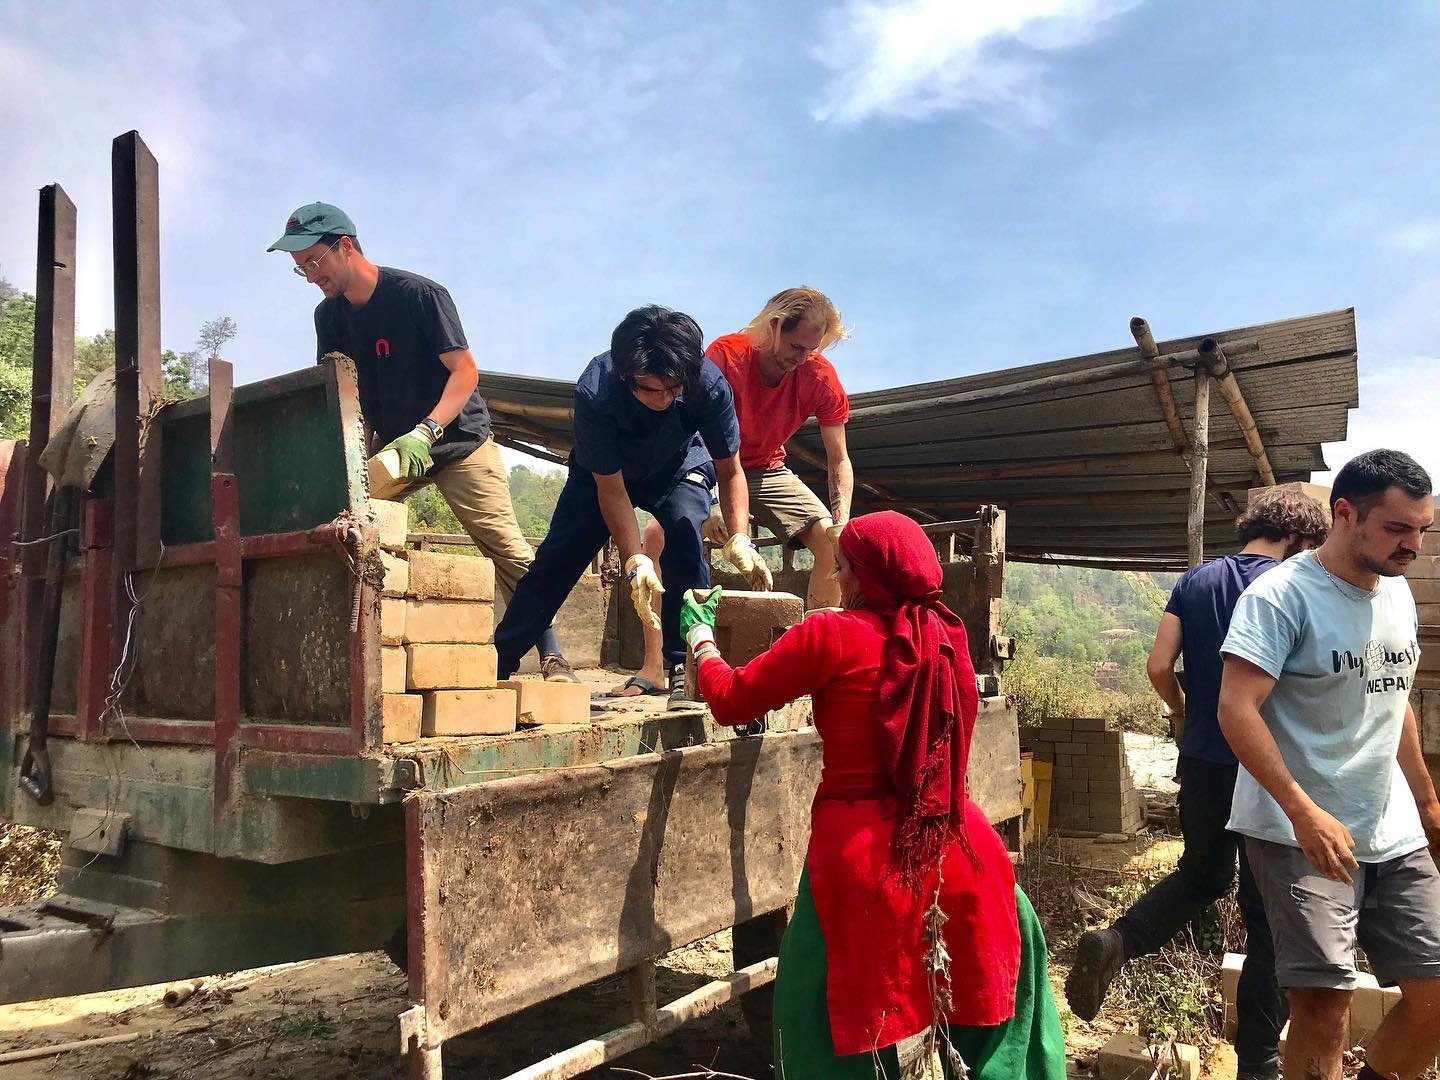 Brick Moving! 🧱💪🏽
 
Brick moving never looked so fun 🤩 We have been making and moving brick for 9 years now, and we still love it. ❤️ 

Last Friday, with the help of our amazing volunteers and local staff, we moved 2 tractors of bricks to the Jan